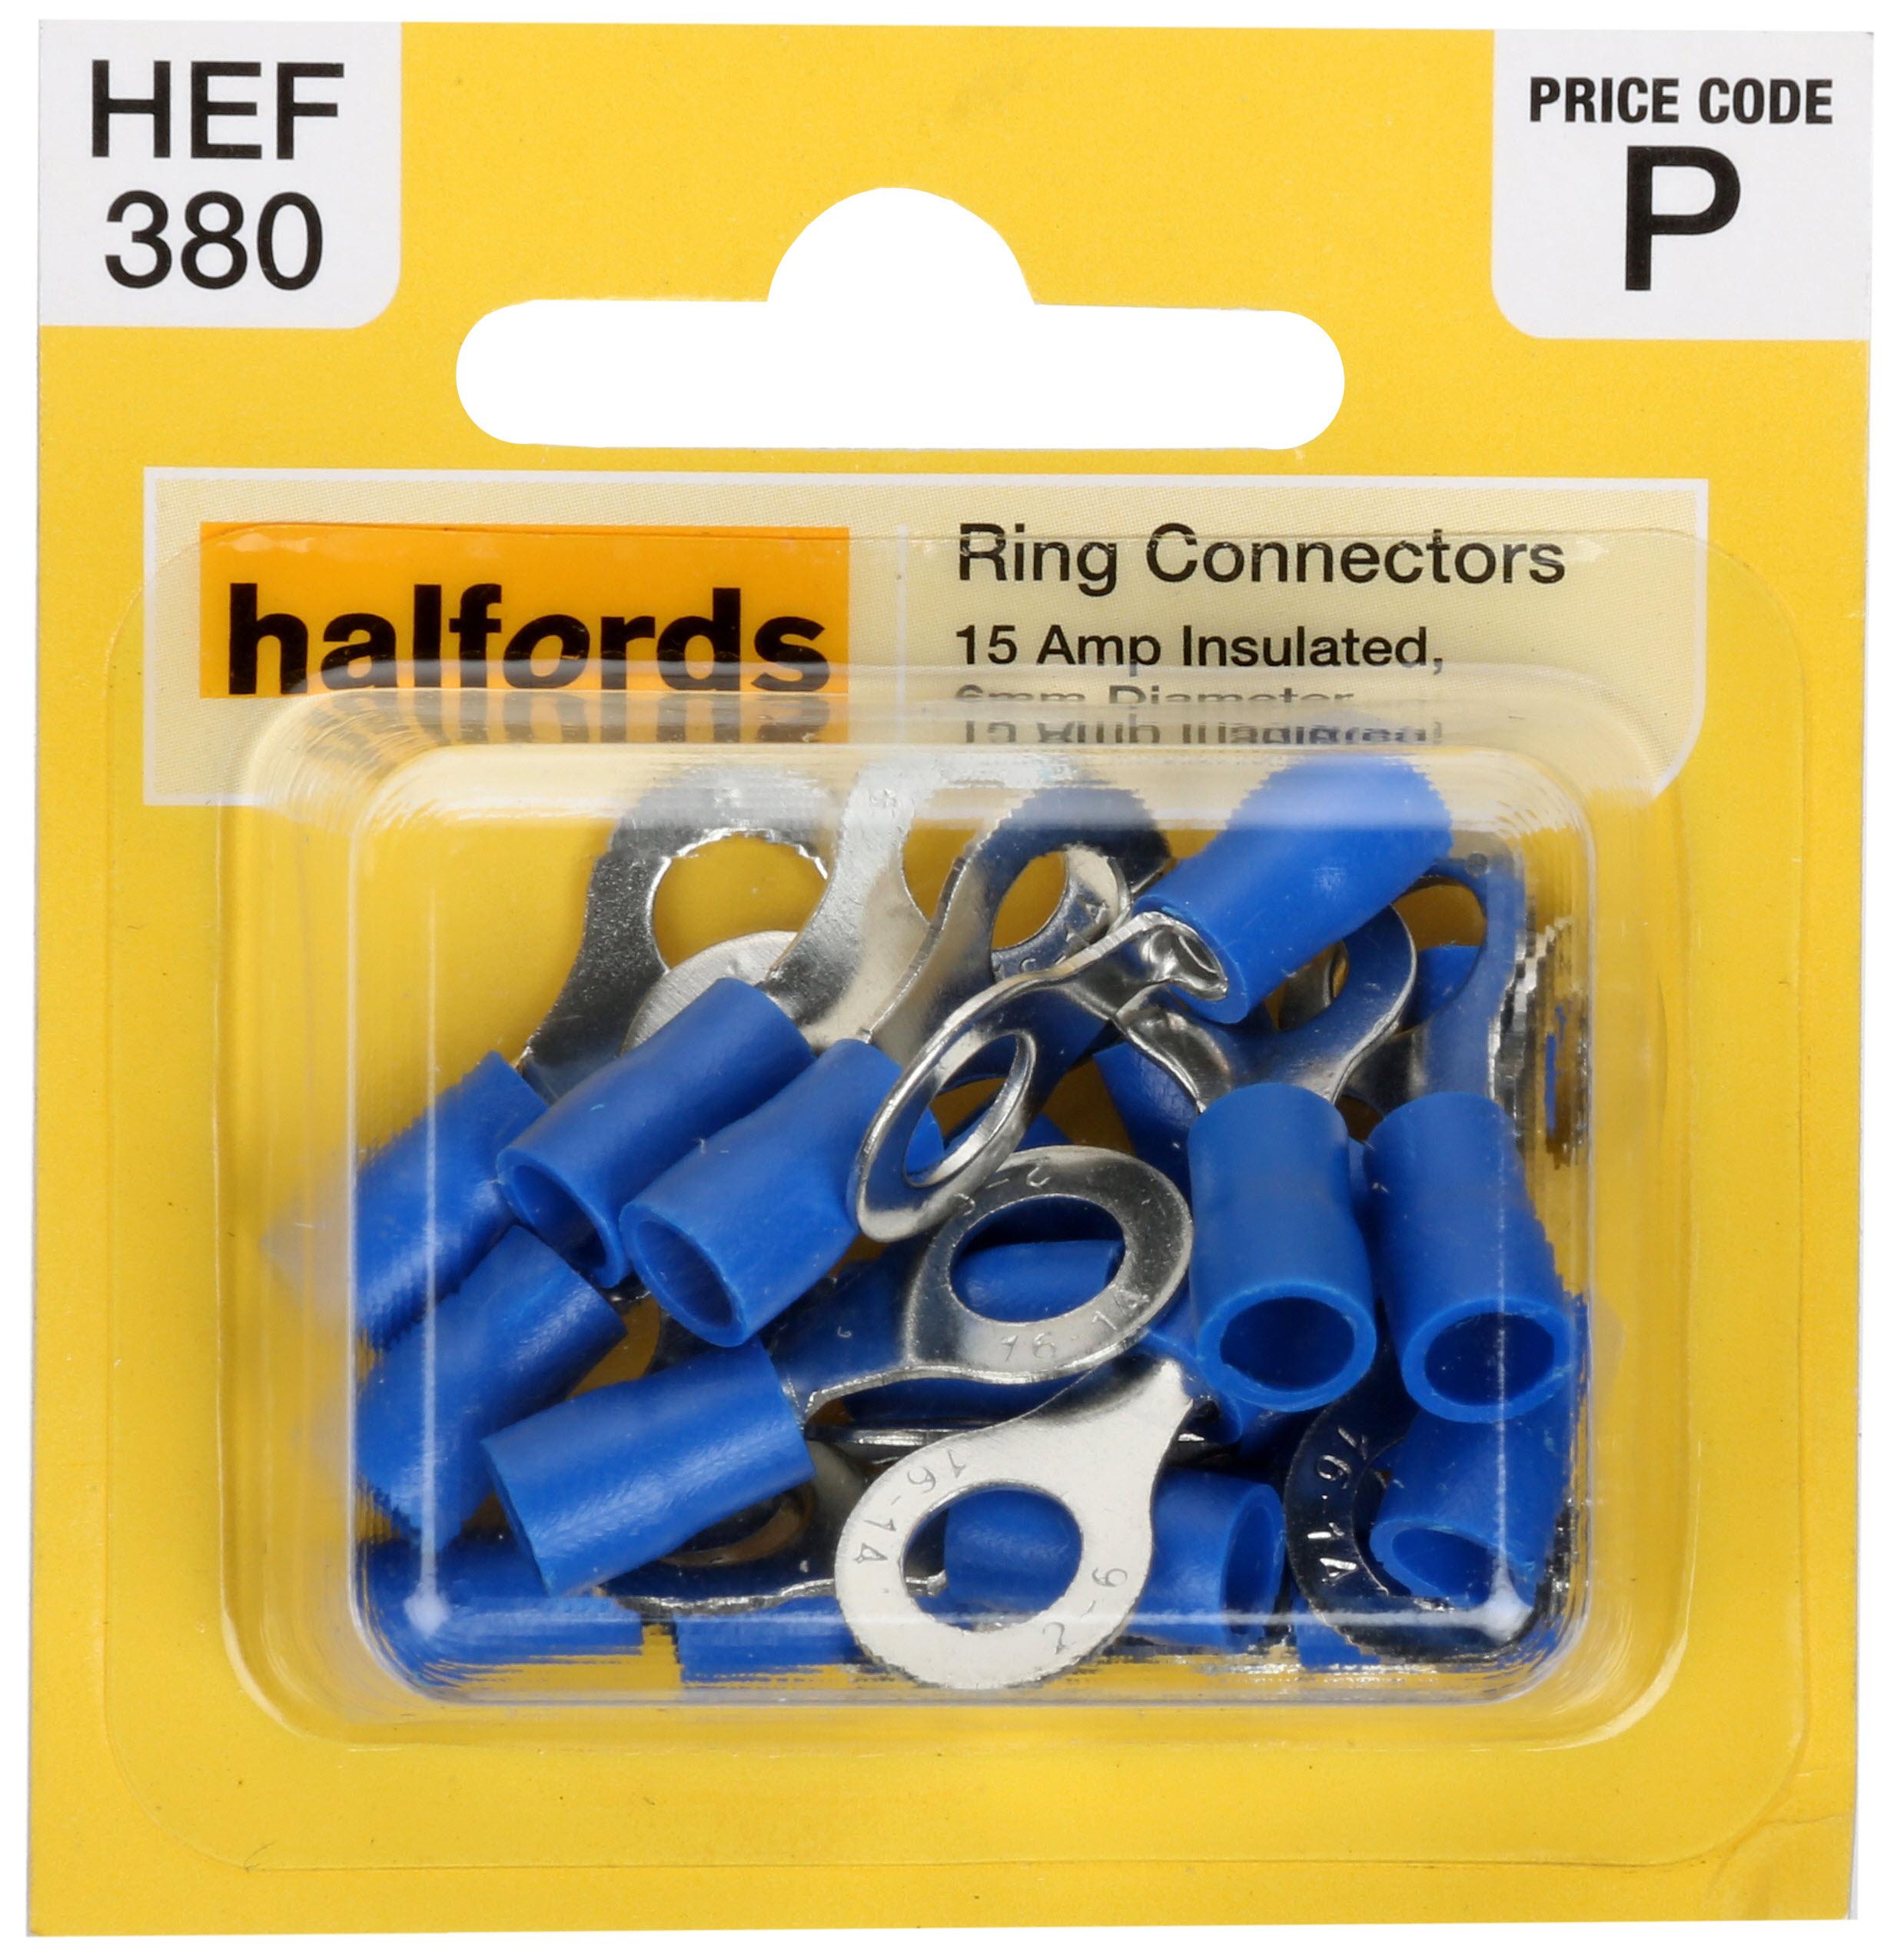 Halfords Ring Connectors 15 Amp Insulated 6Mm Hef380